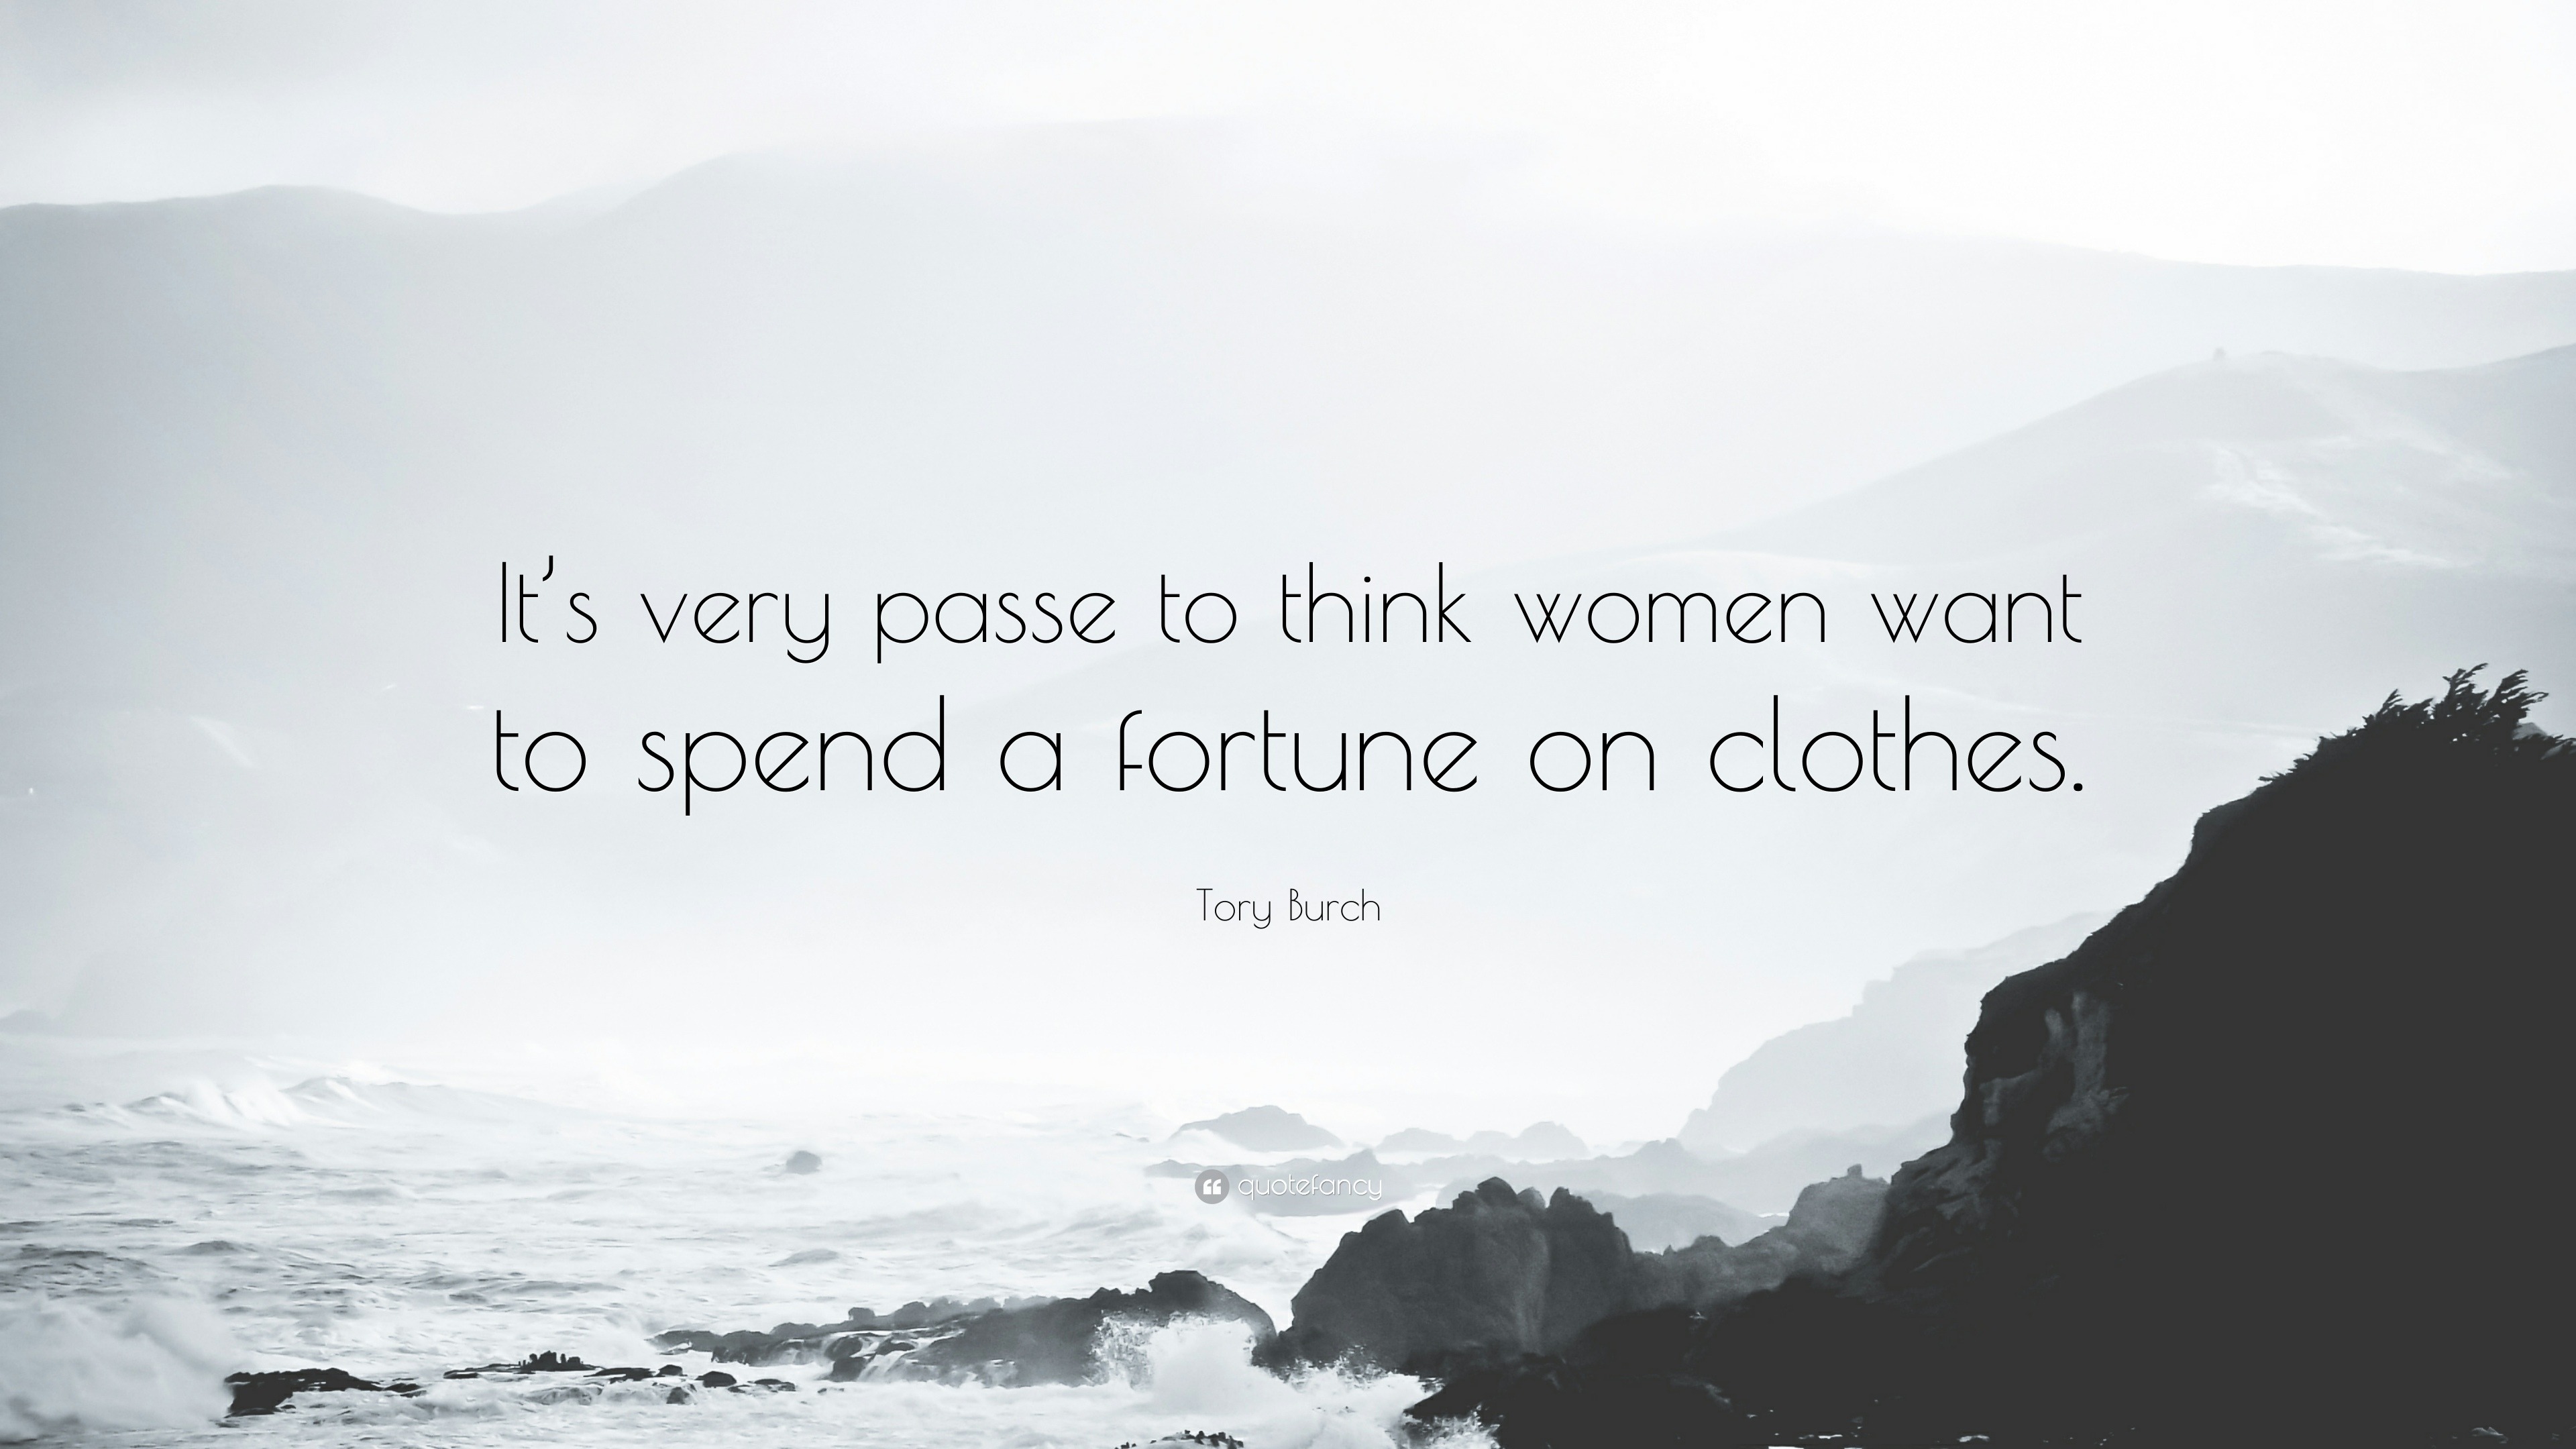 https://quotefancy.com/media/wallpaper/3840x2160/1227783-Tory-Burch-Quote-It-s-very-passe-to-think-women-want-to-spend-a.jpg